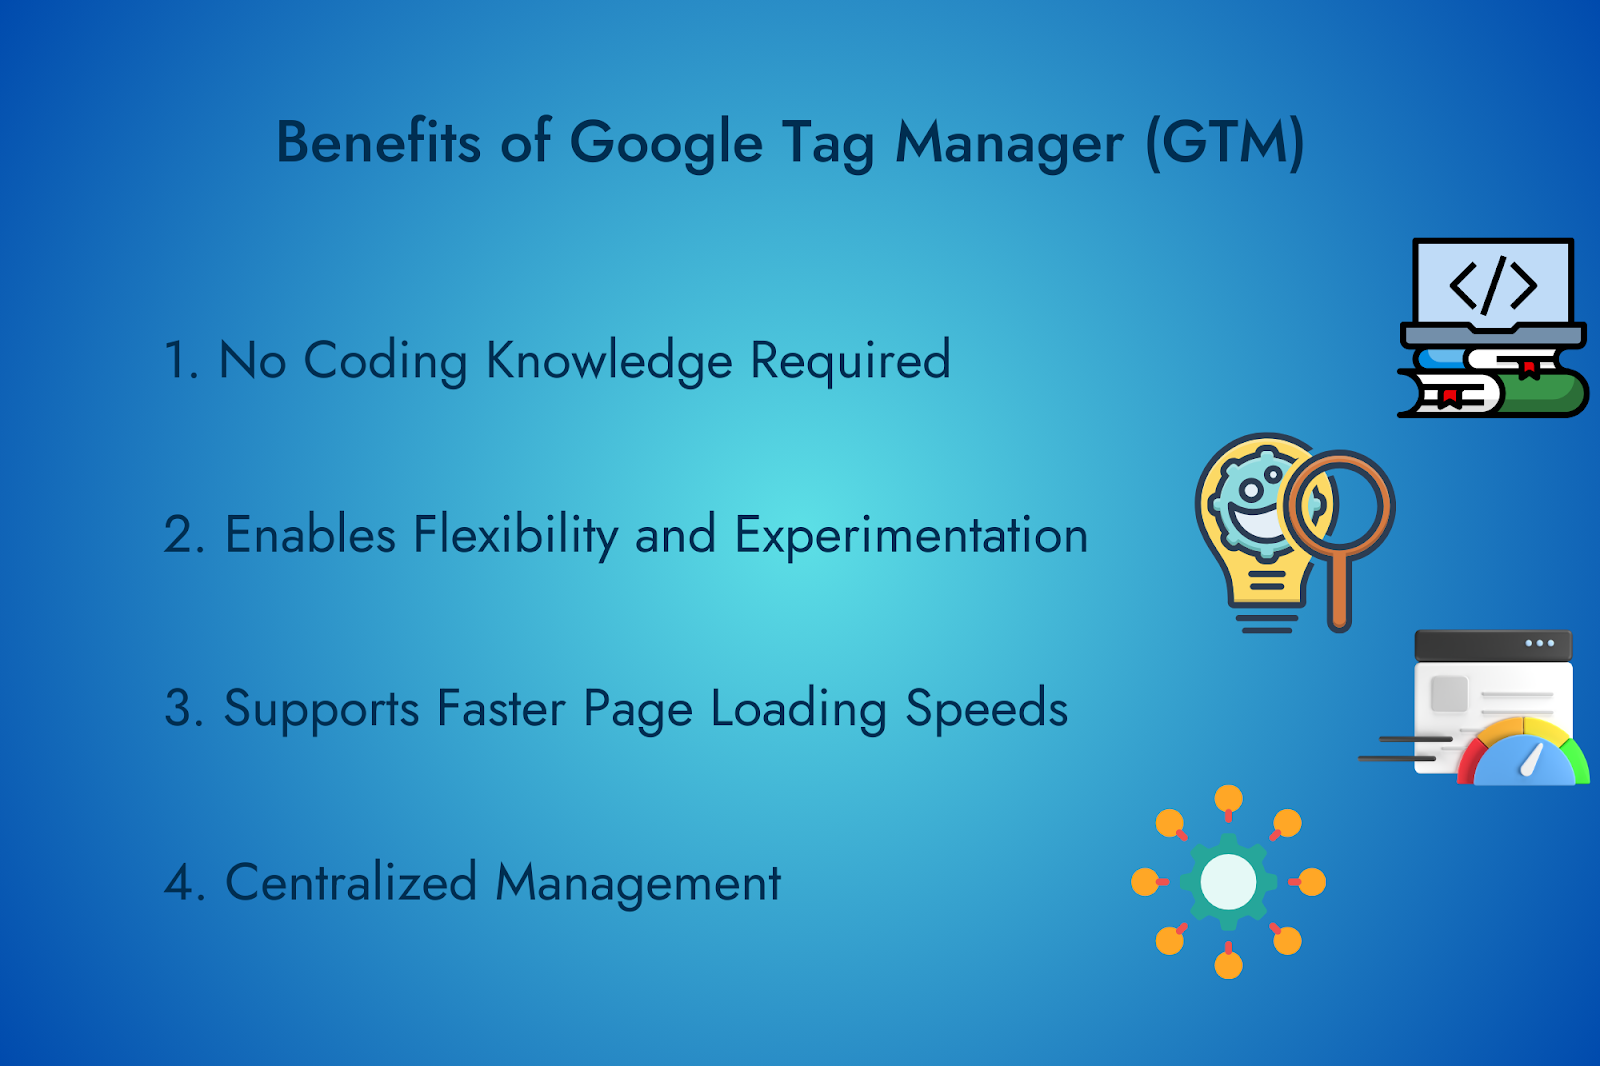 Benefits of Google Tag Manager (GTM)